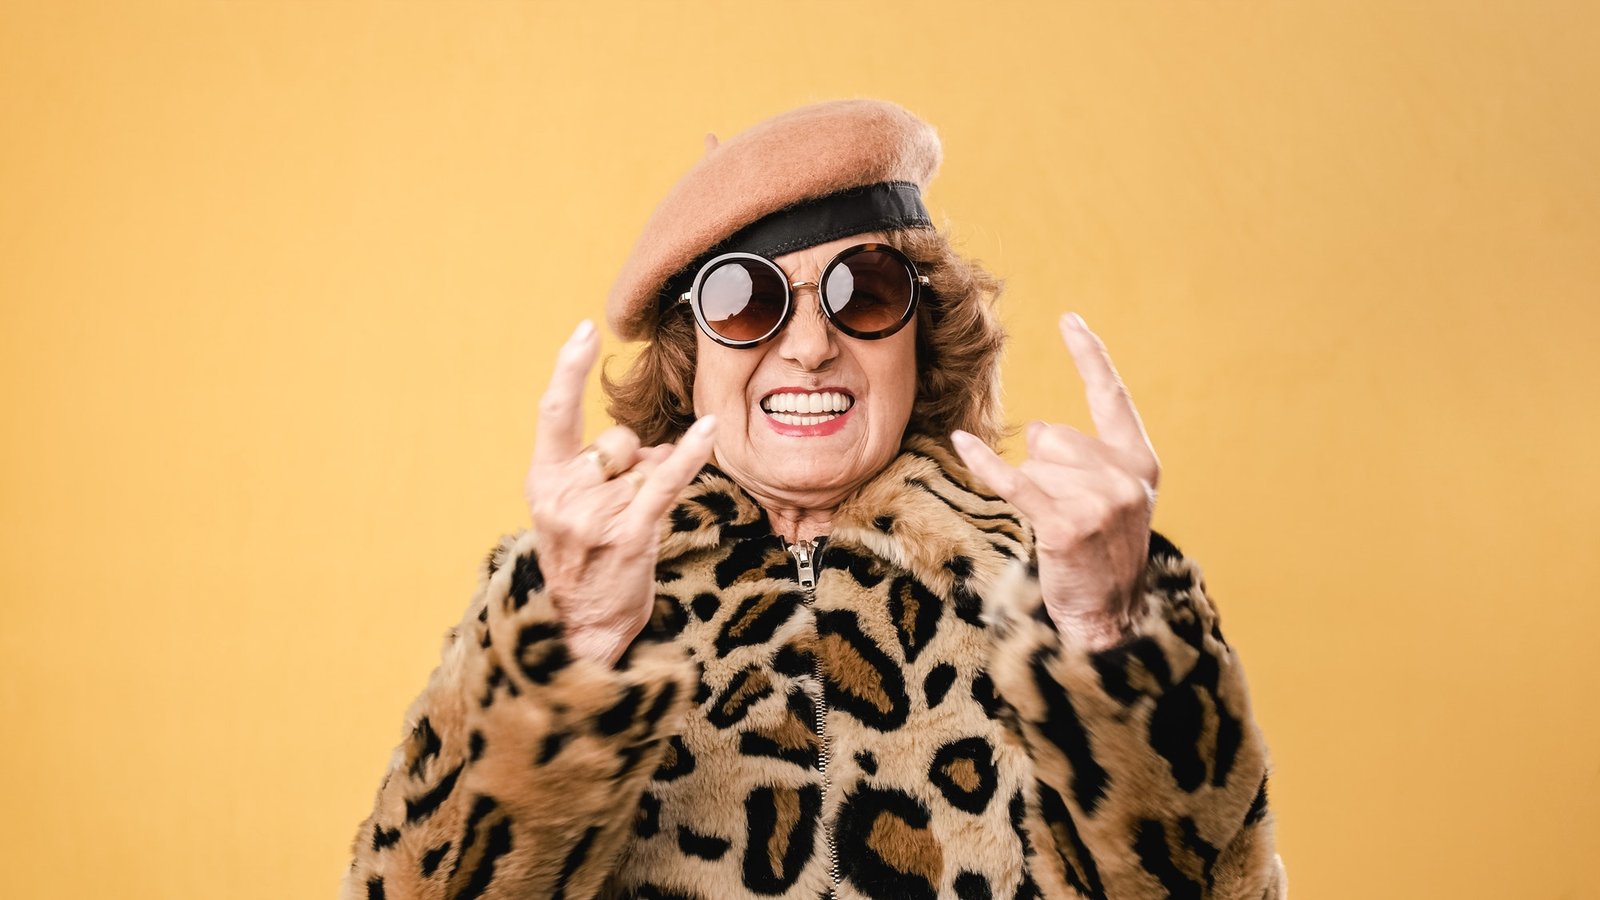 Stylish senior woman showing rock n roll gesture while posing on isolated background.